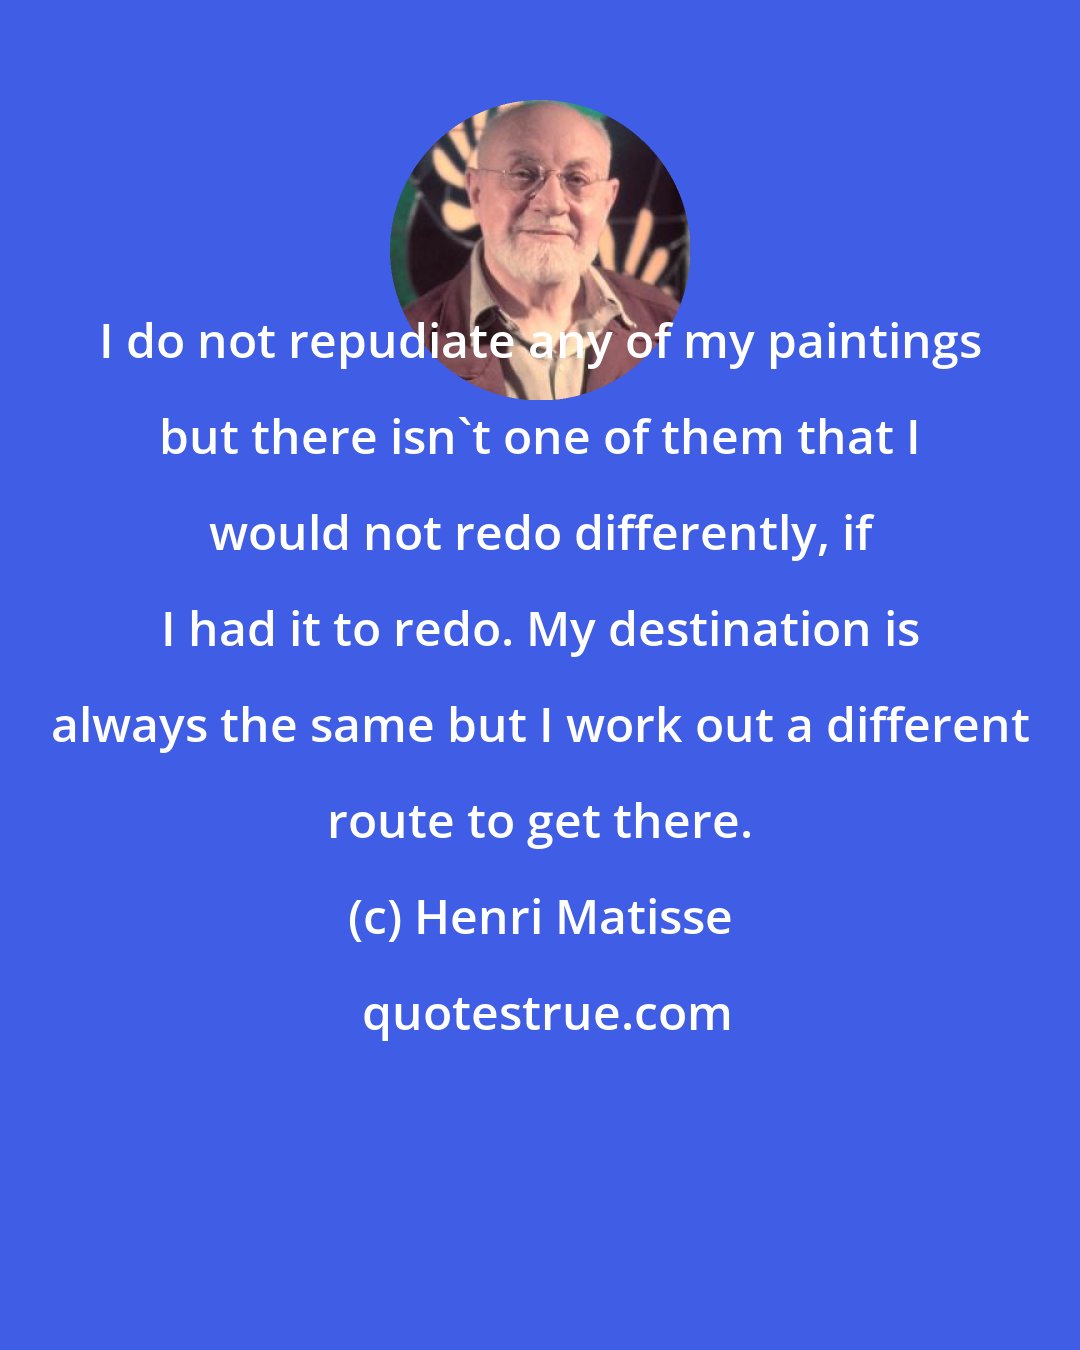 Henri Matisse: I do not repudiate any of my paintings but there isn't one of them that I would not redo differently, if I had it to redo. My destination is always the same but I work out a different route to get there.